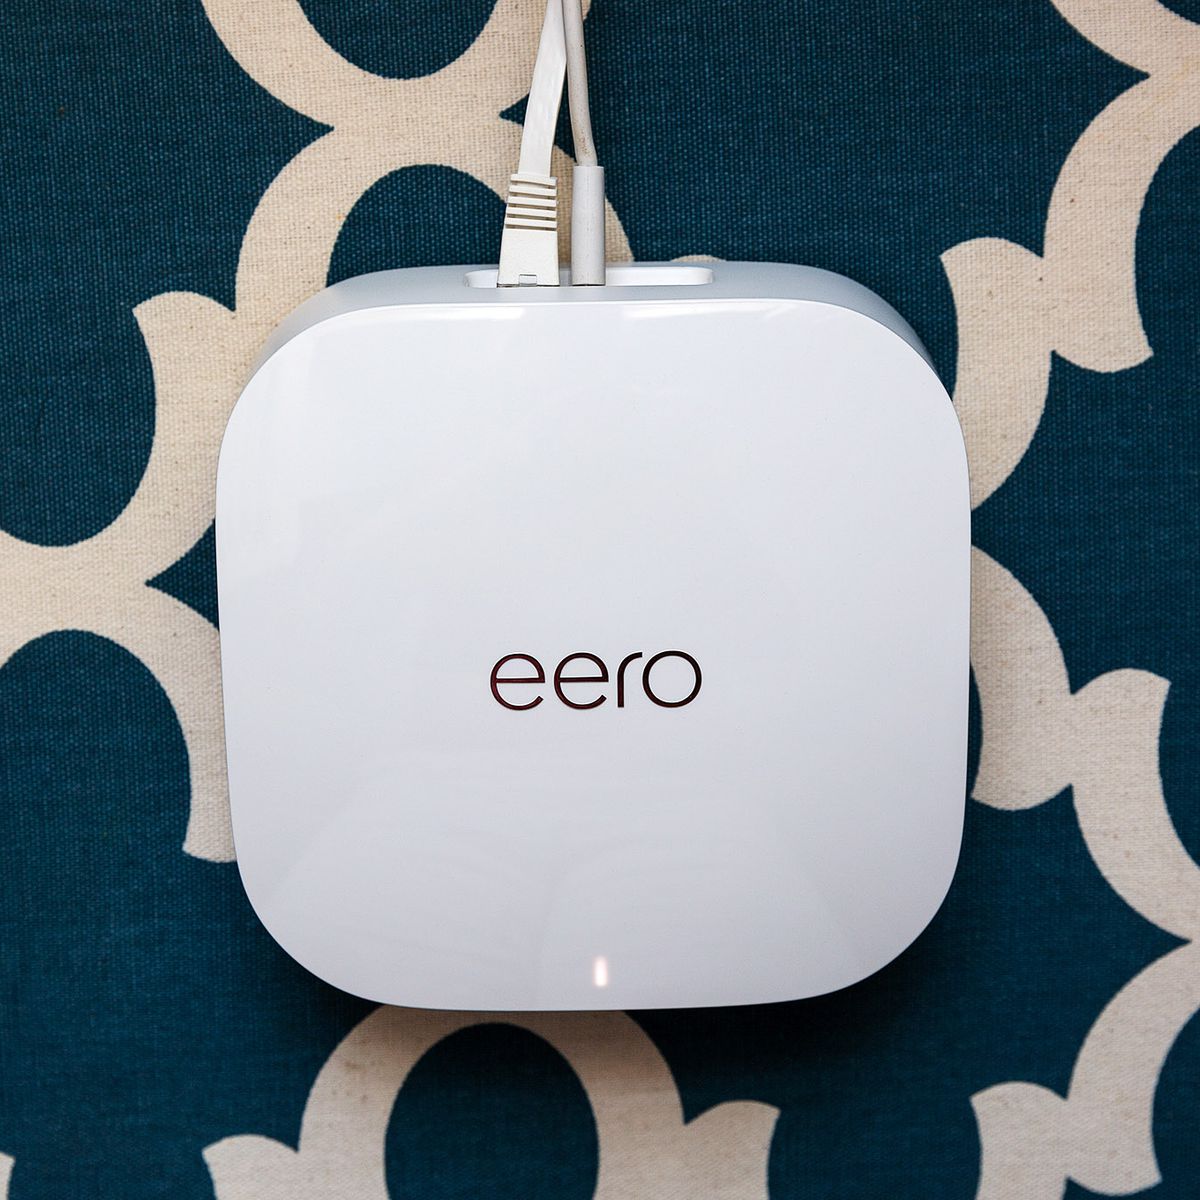 Eeros flagship pro 6e mesh router is its lowest price